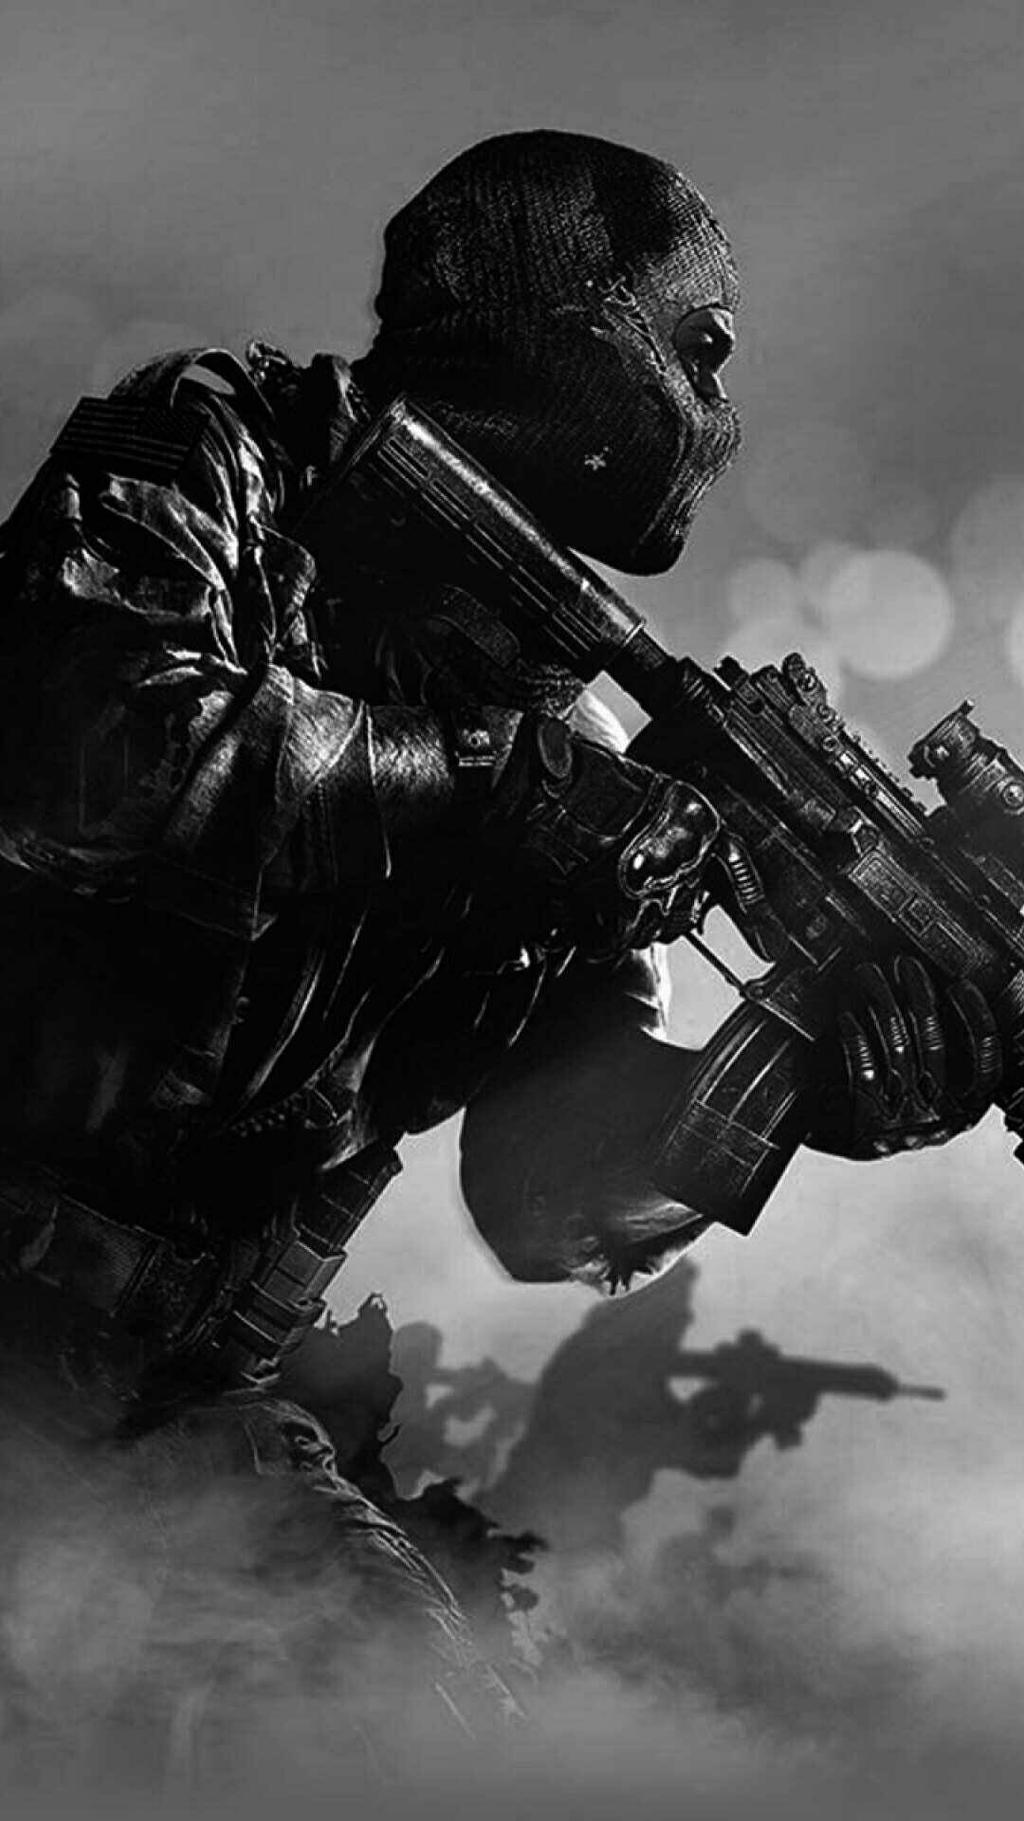 CALL OF DUTY wallpaper for mobile by LORD12DARK on DeviantArt